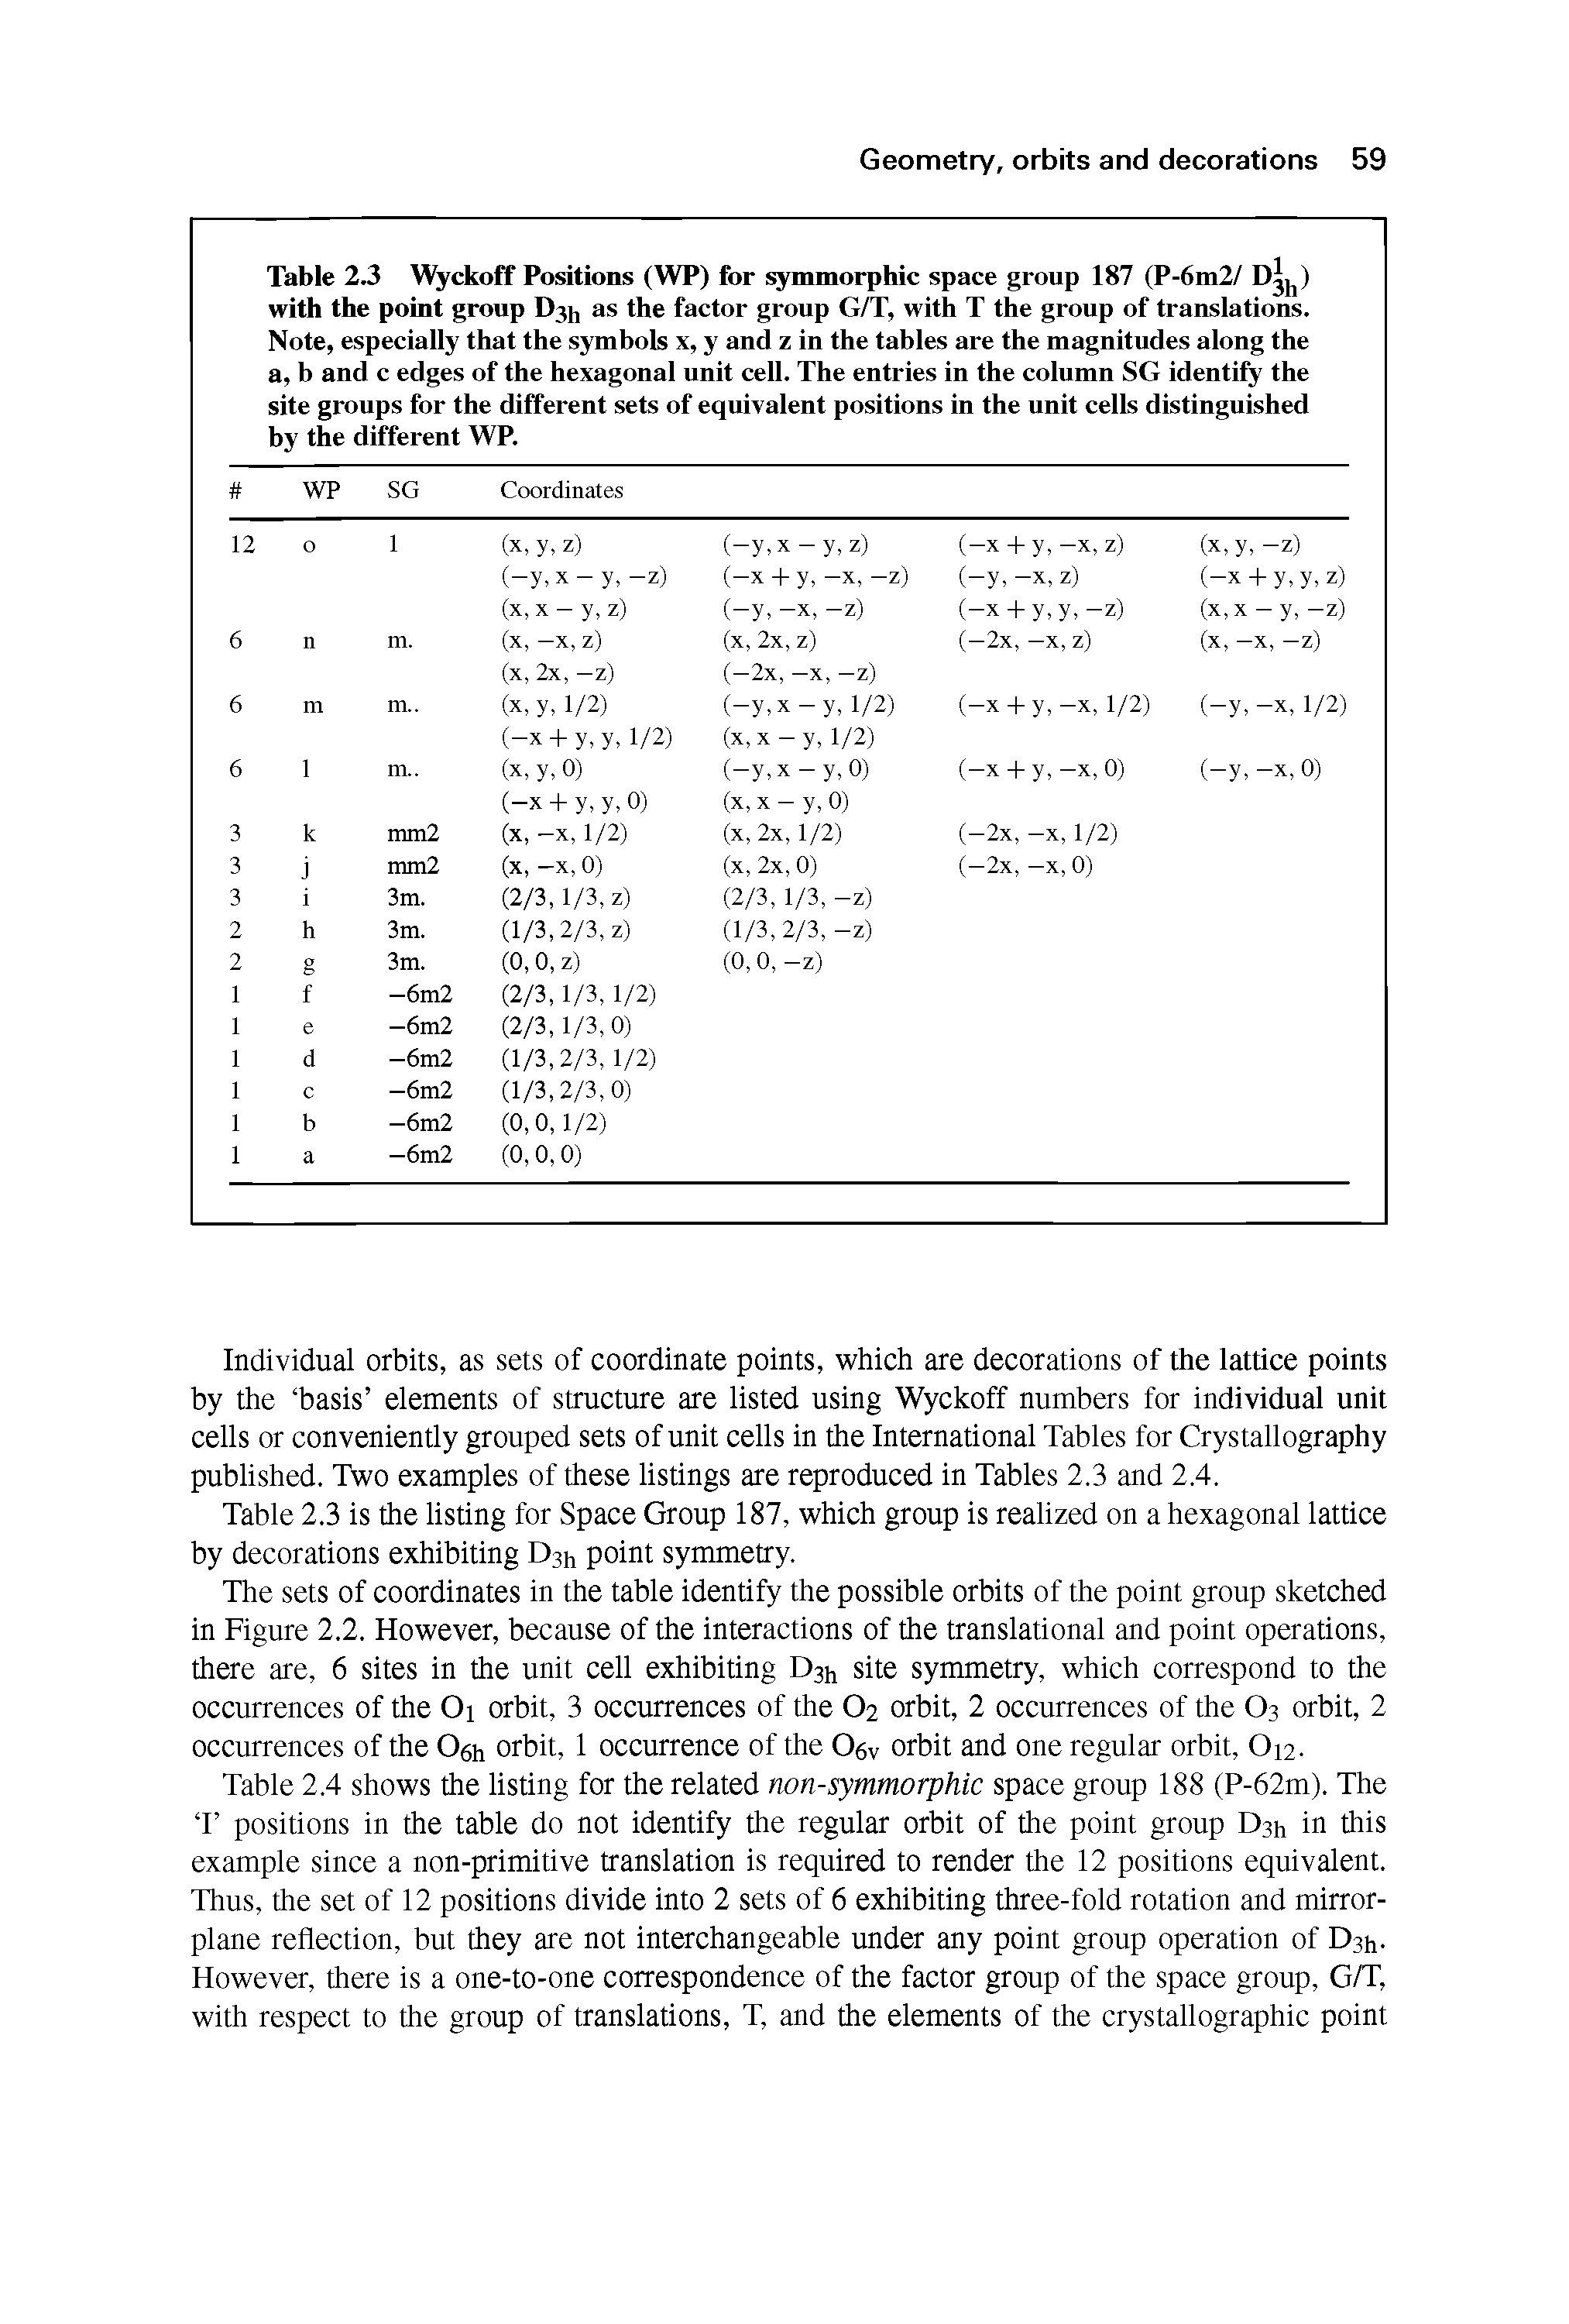 Table 2.3 Wyckoff Positions (WP) for symmorphic space group 187 (P-6m2/ Djj ) with the point group Dyj, as the factor group G/T, with T the group of translations. Note, especially that the symbols x, y and z in the tables are the magnitudes along the a, b and c edges of the hexagonal unit cell. The entries in the column SG identify the site groups for the different sets of equivalent positions in the unit cells distinguished by the different WP.